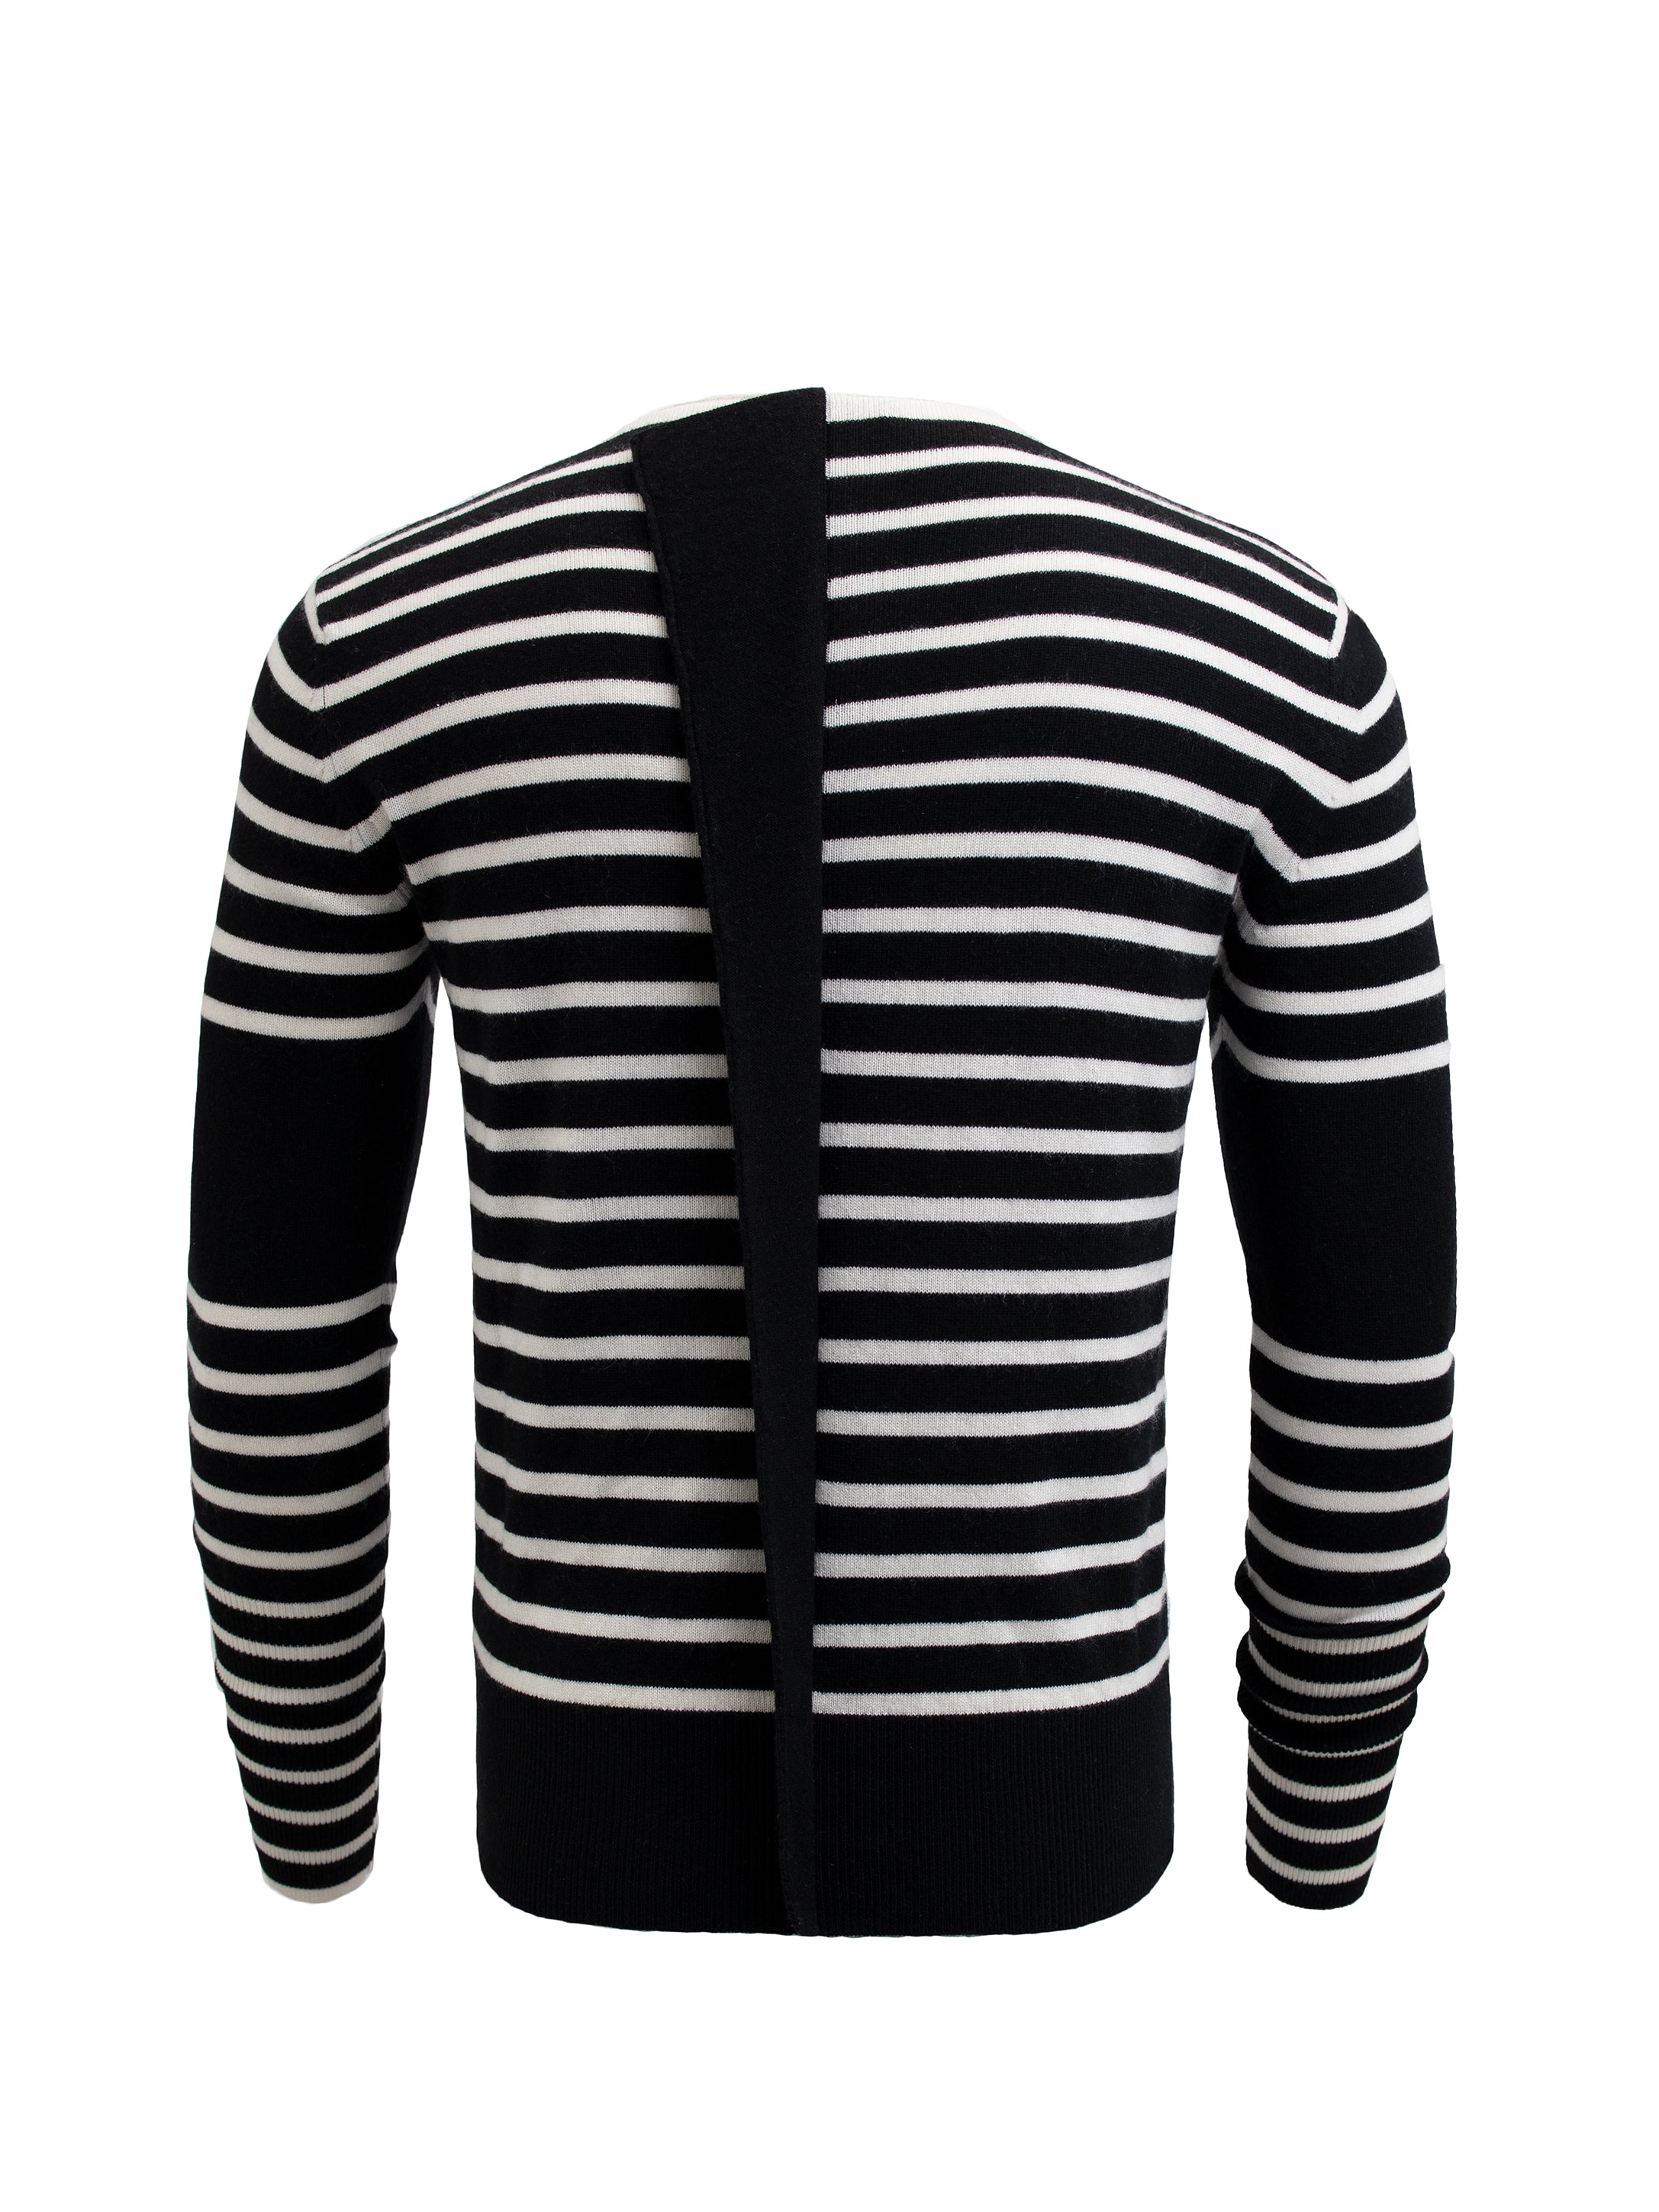 BLACK AND CREAM STRIPED JUMPER WITH INTEGRATED SPINE